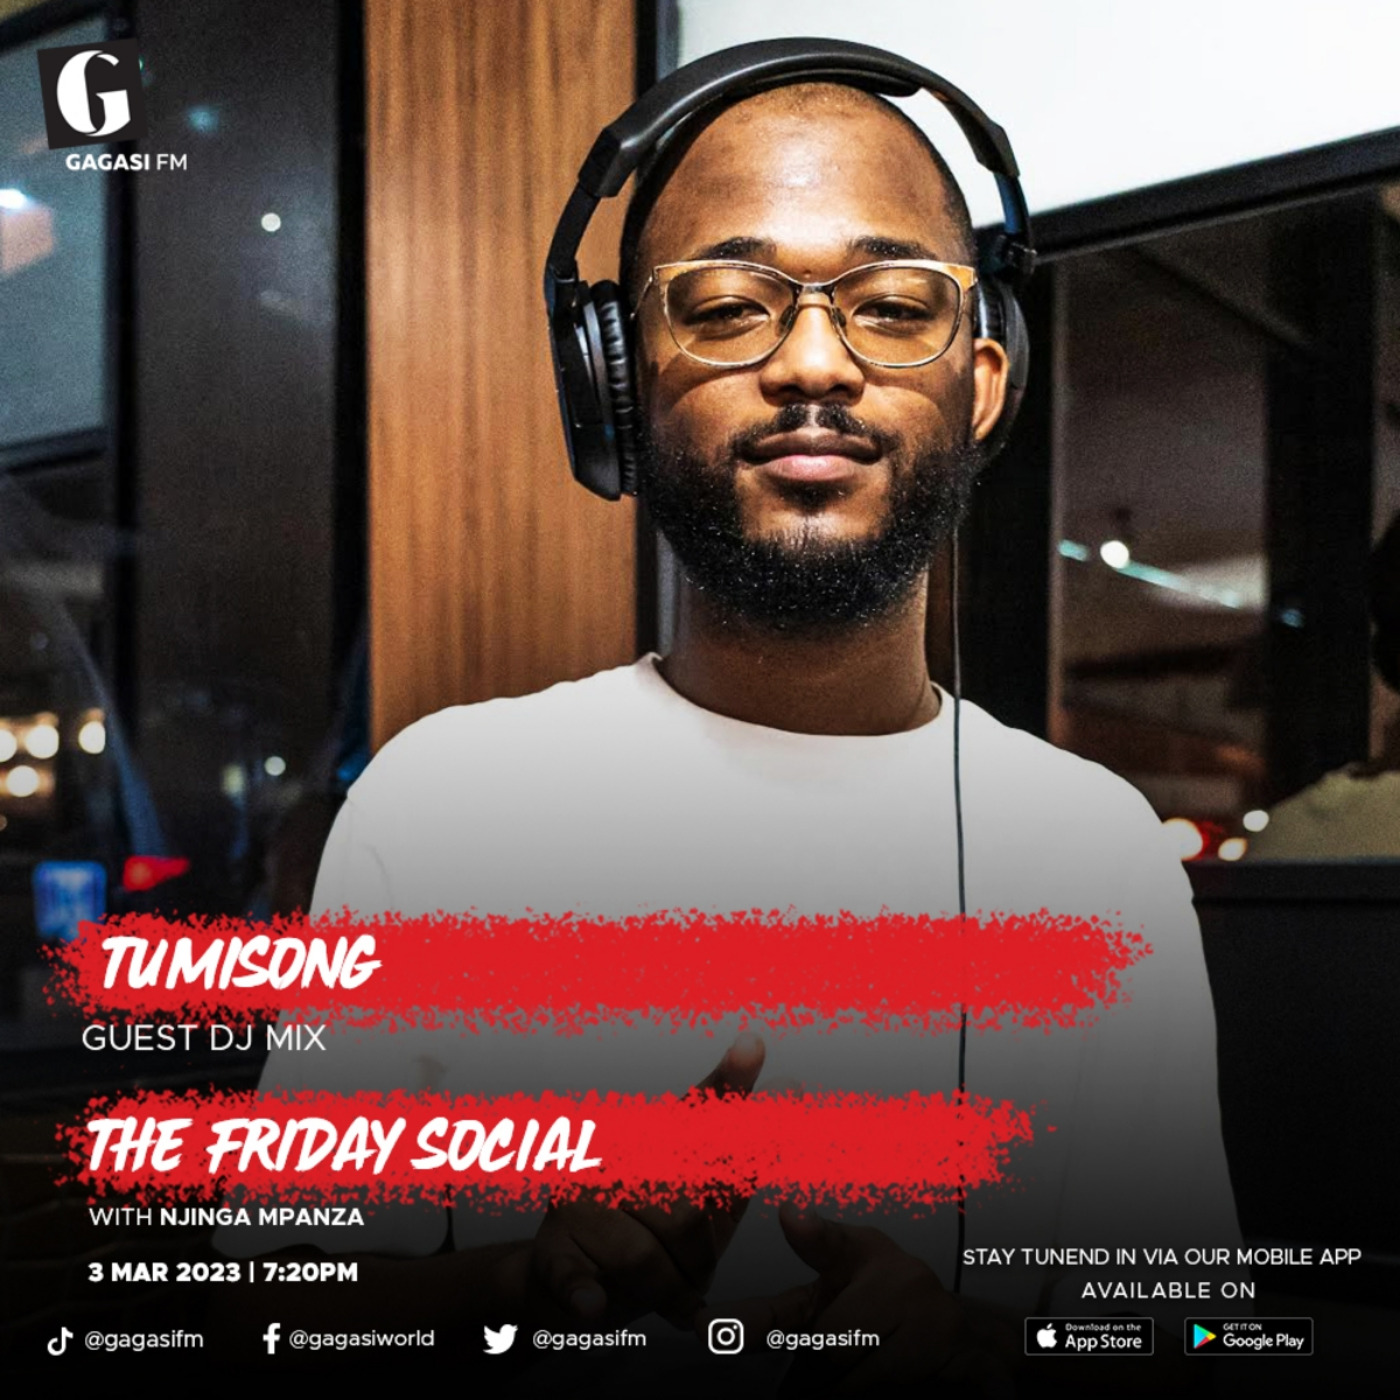 Tumisong - Gagasi FM (The Friday Social Guestmix)